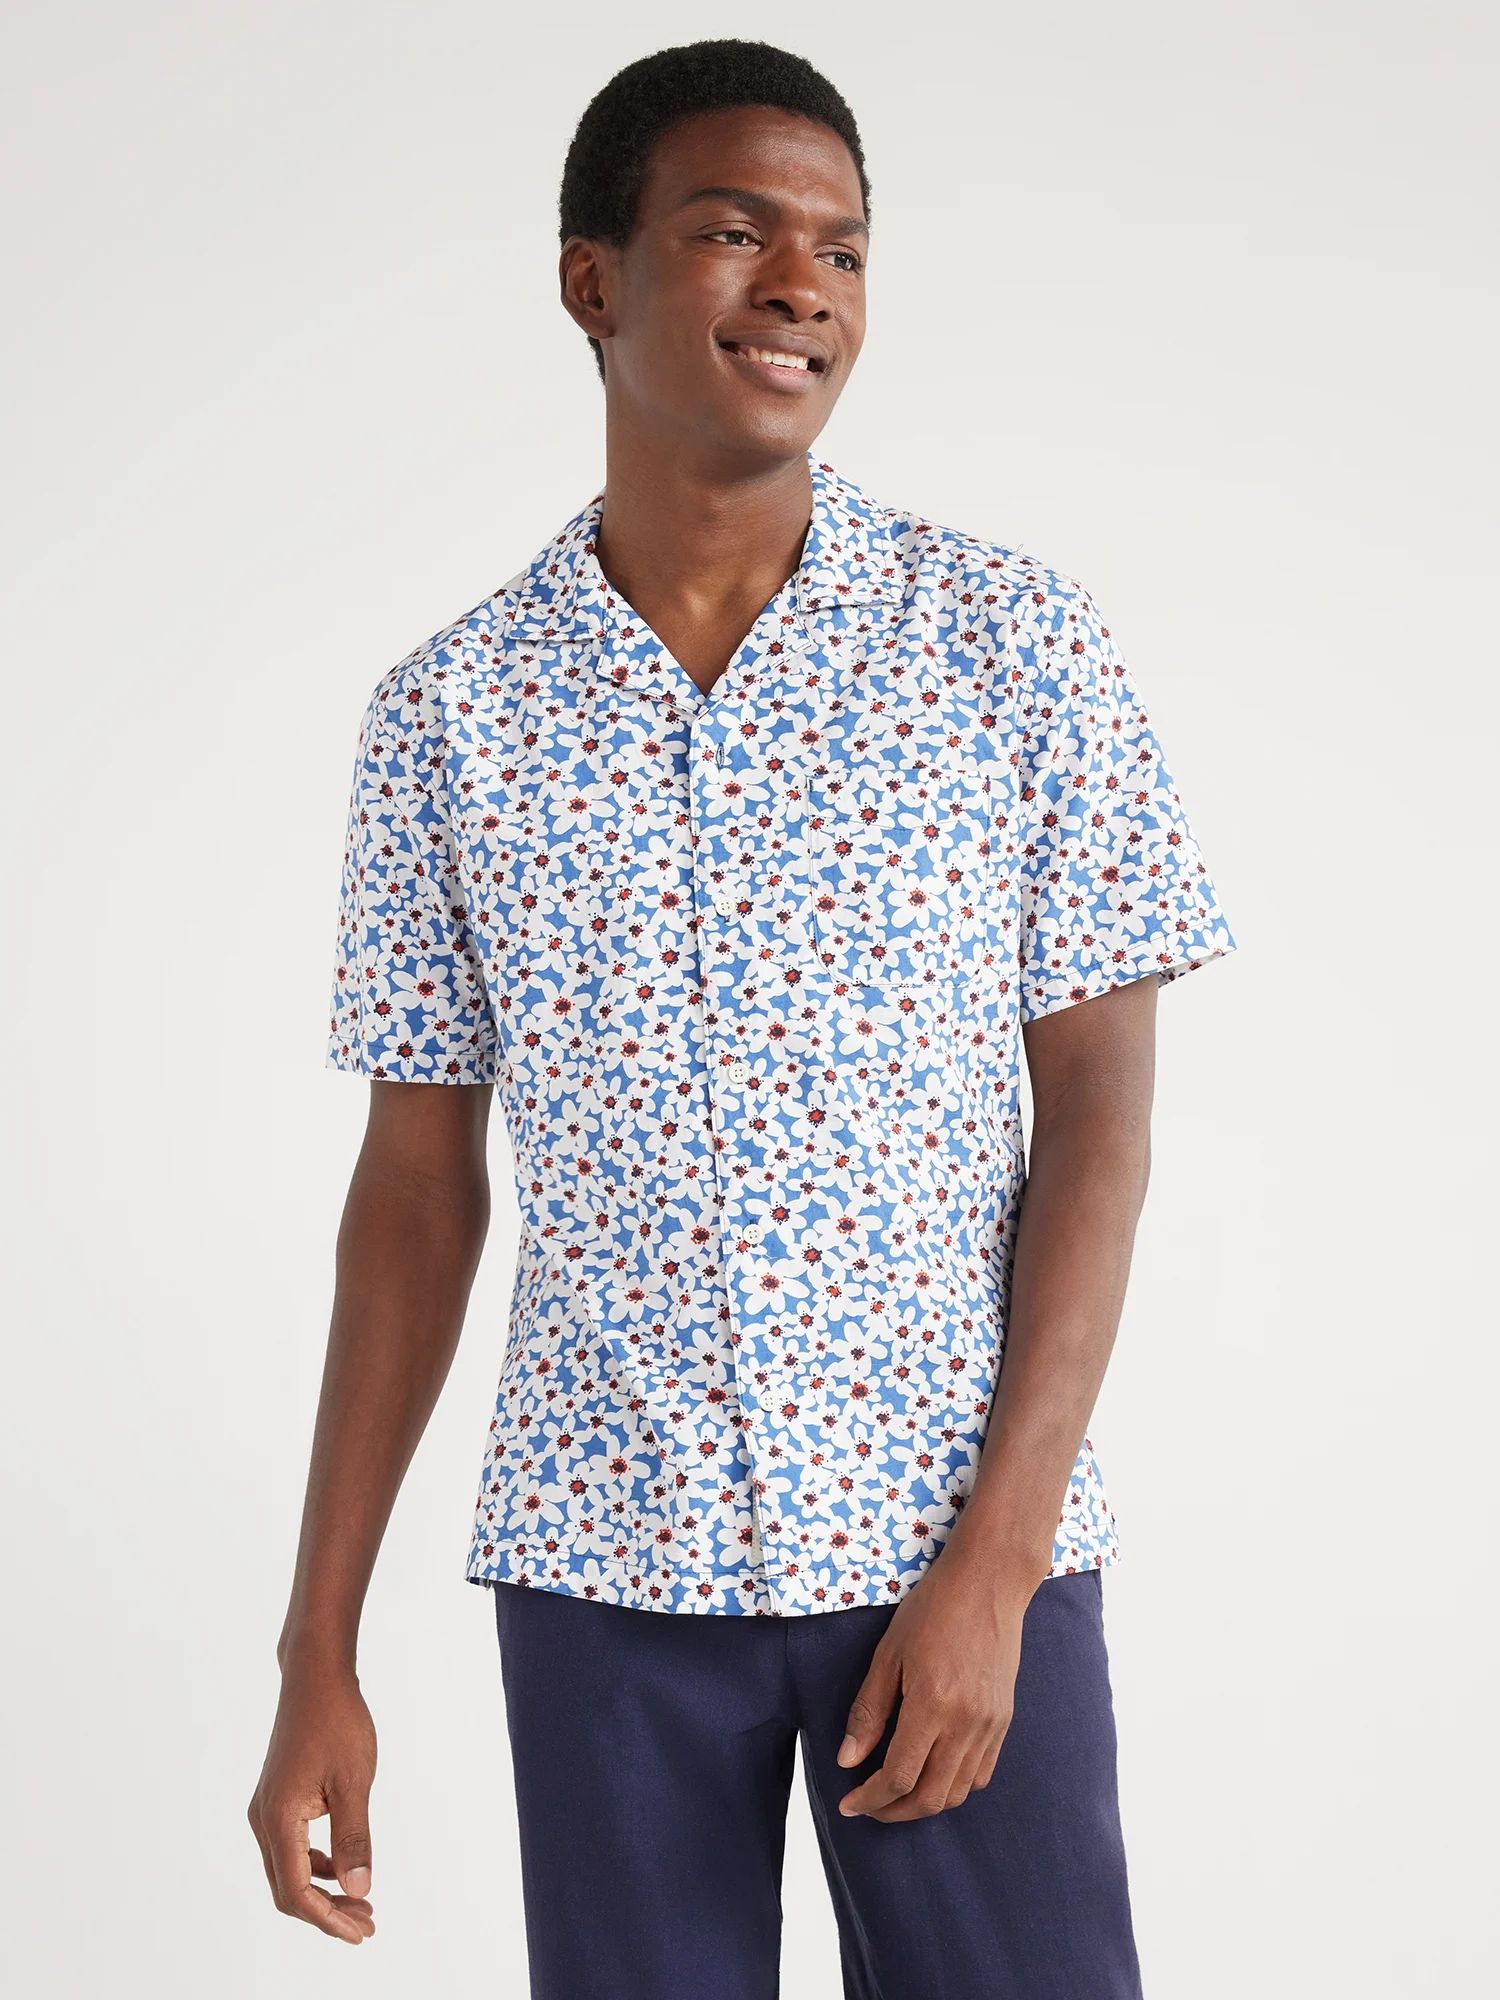 Free Assembly Men's Floral Camp Shirt with Short Sleeves, Sizes S-XXXL | Walmart (US)